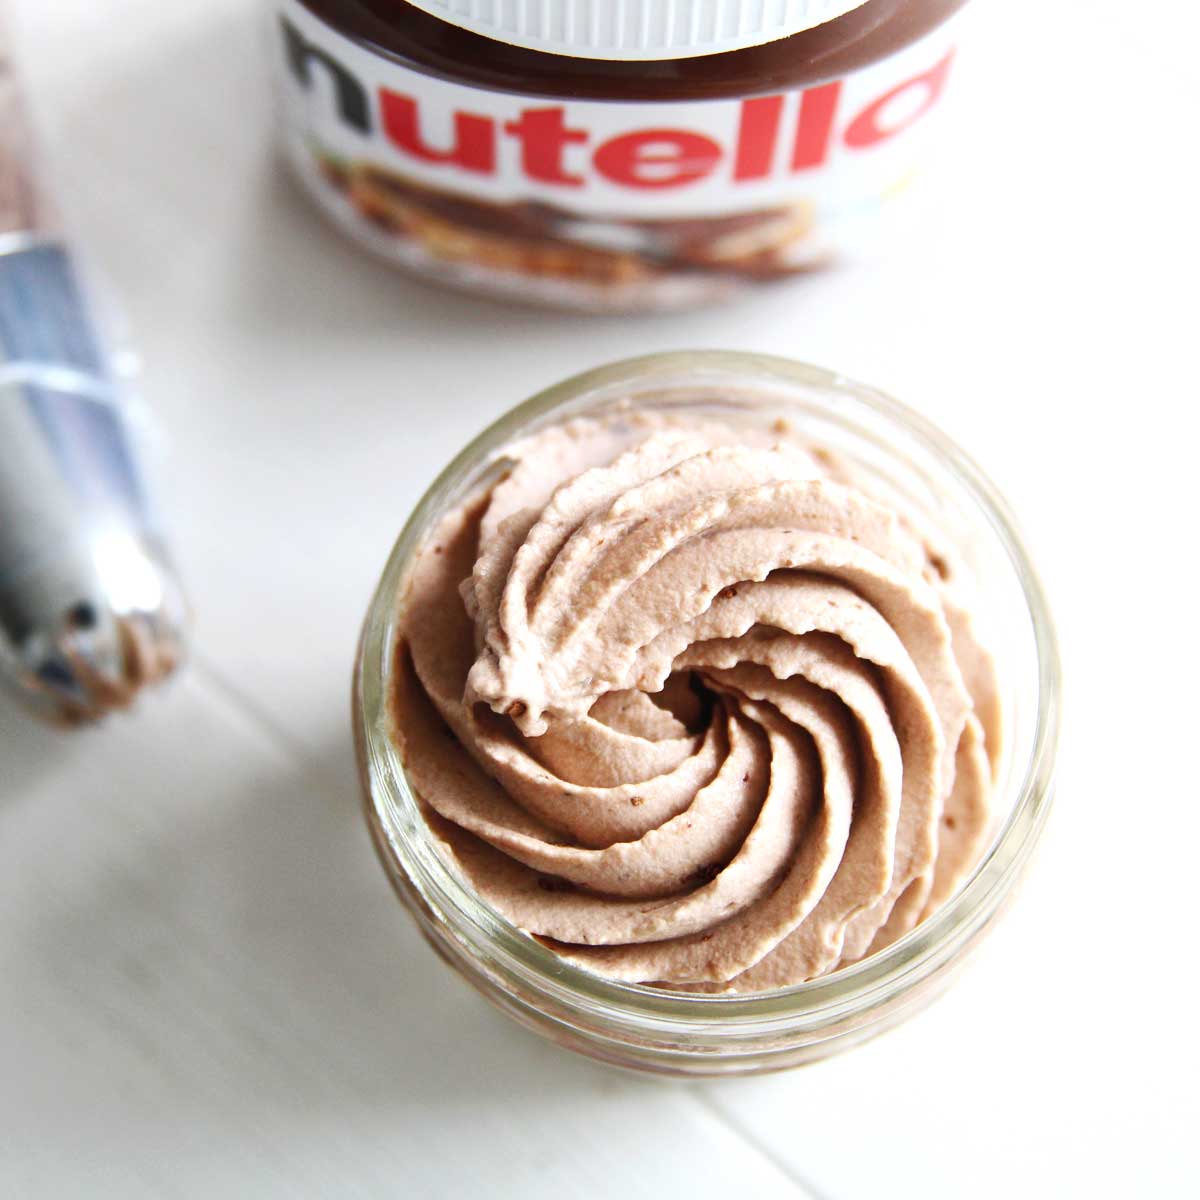 How to Make Nutella Chocolate Whipped Cream (Chantilly Cream)